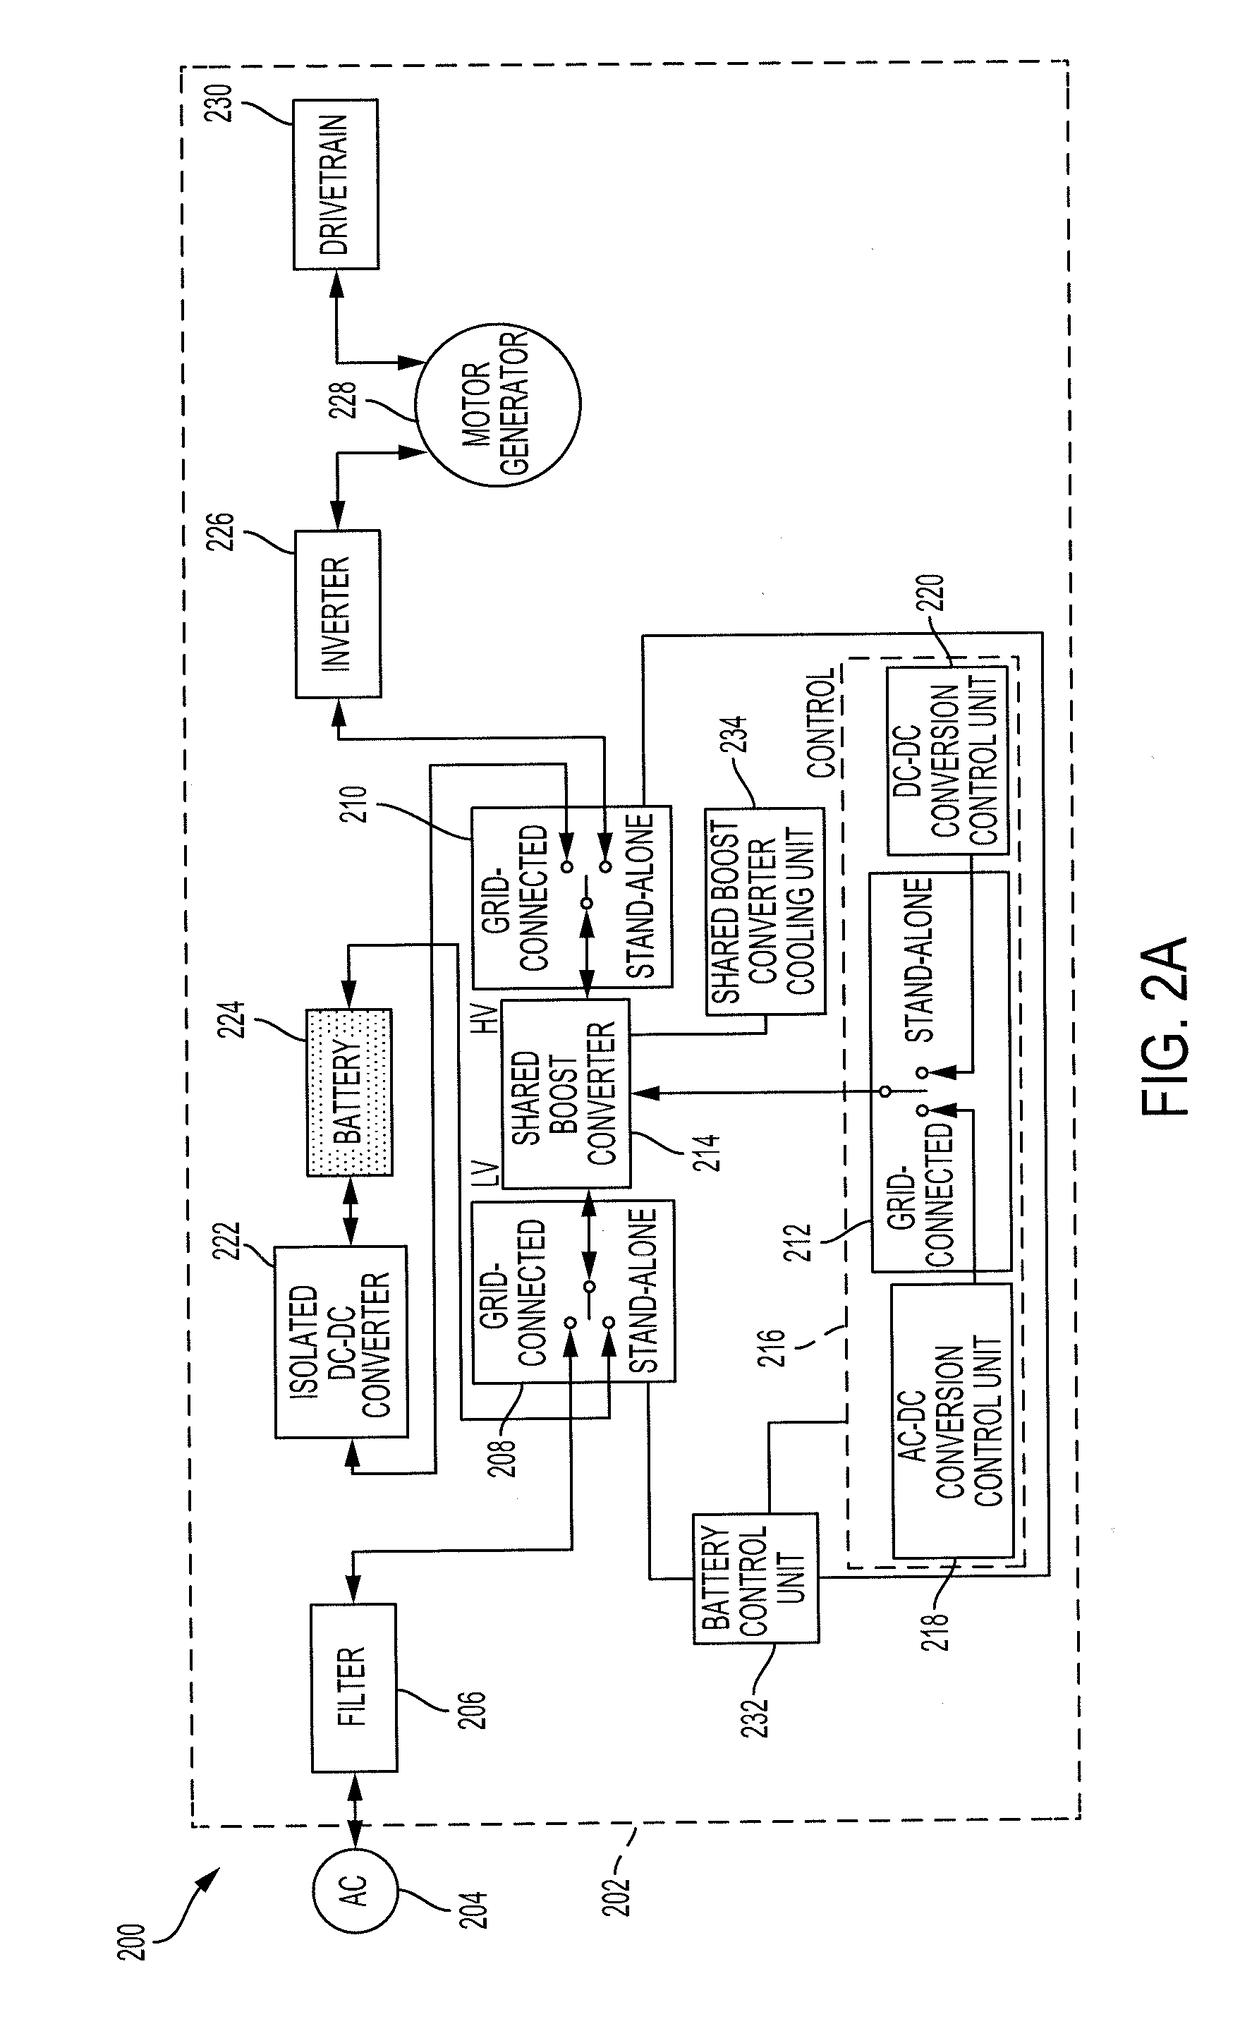 Electric vehicle power system with shared converter